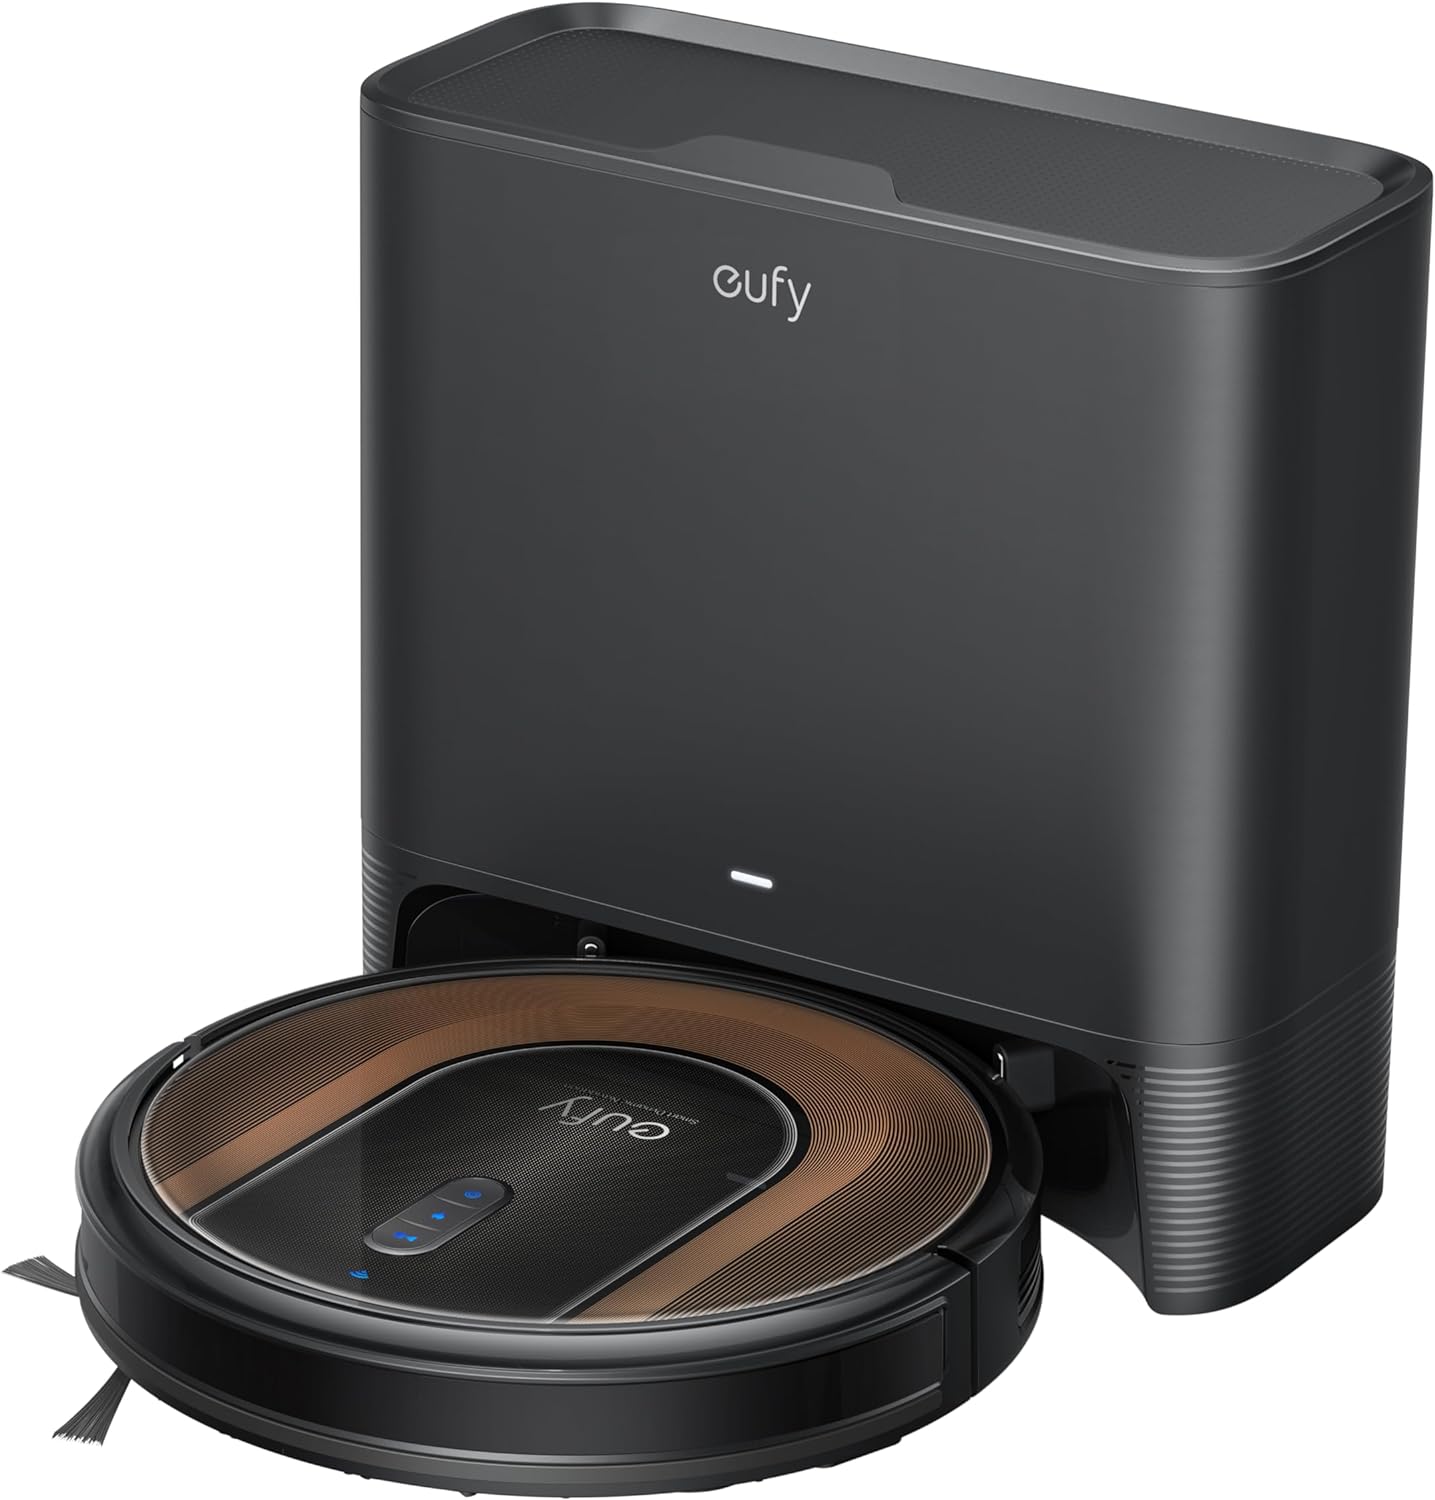 Prime Exclusive: eufy RoboVac G30 Hybrid+ 2-in-1 Sweep and mop, Self-Emptying Robot Vacuum $260 + Free Shipping